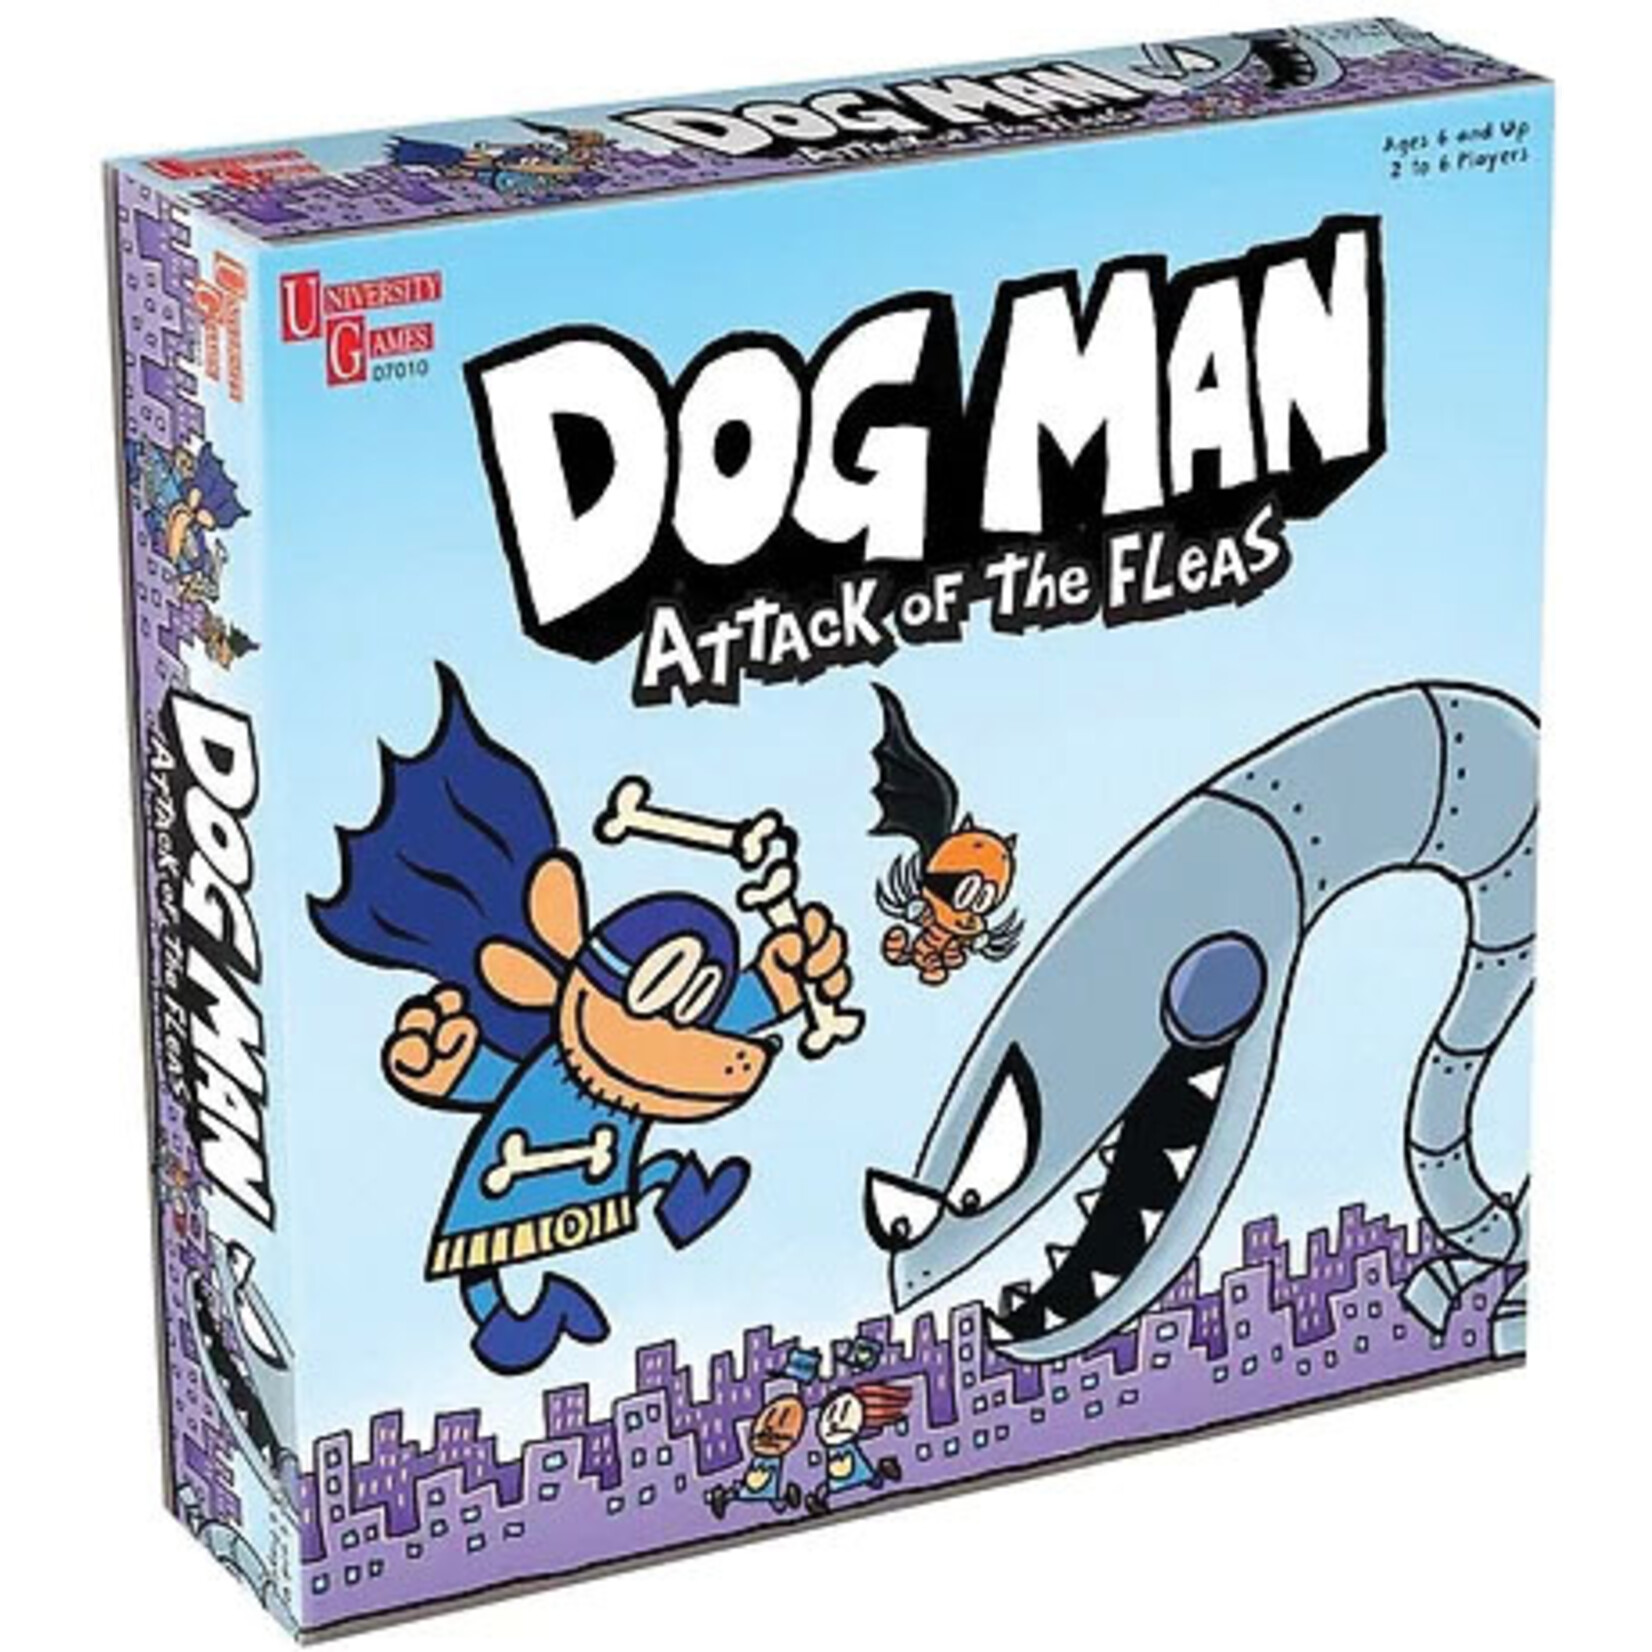 University Games Dog Man Attack of the Fleas Game